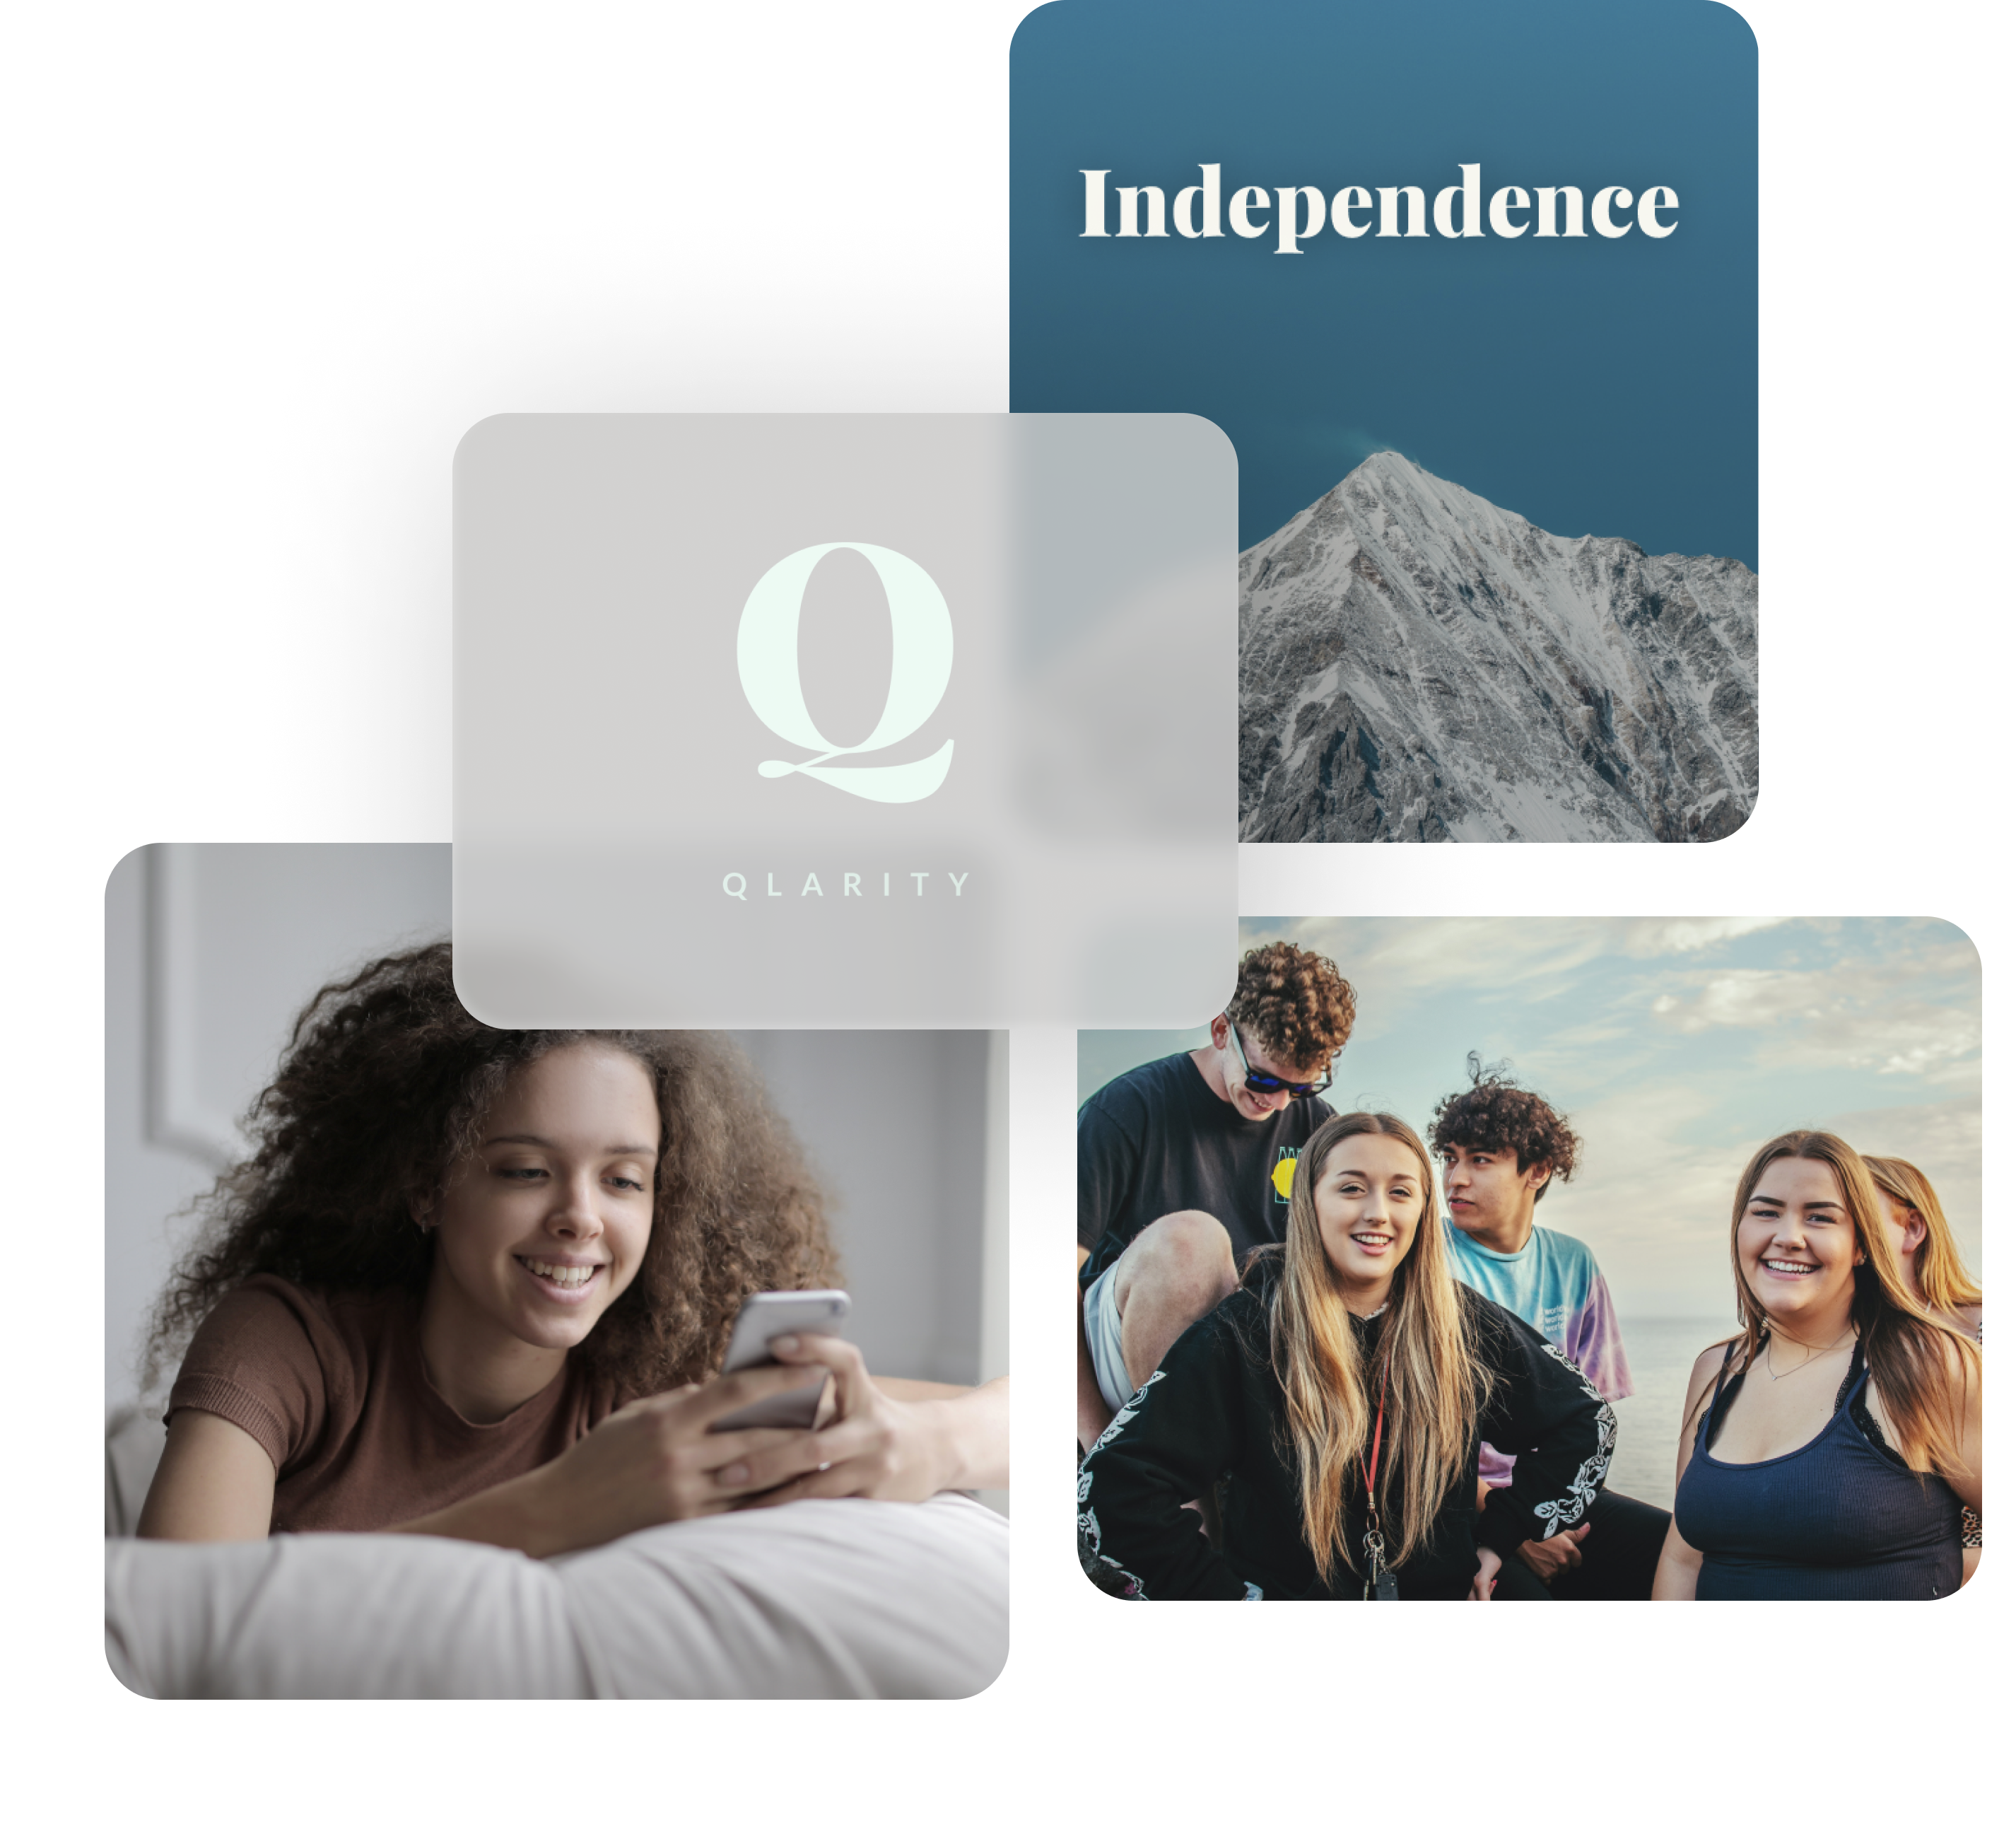 Collage of images of smiling teen looking at phone, smiling group of teens together outdoors, mountain peak, and Qlarity logo.